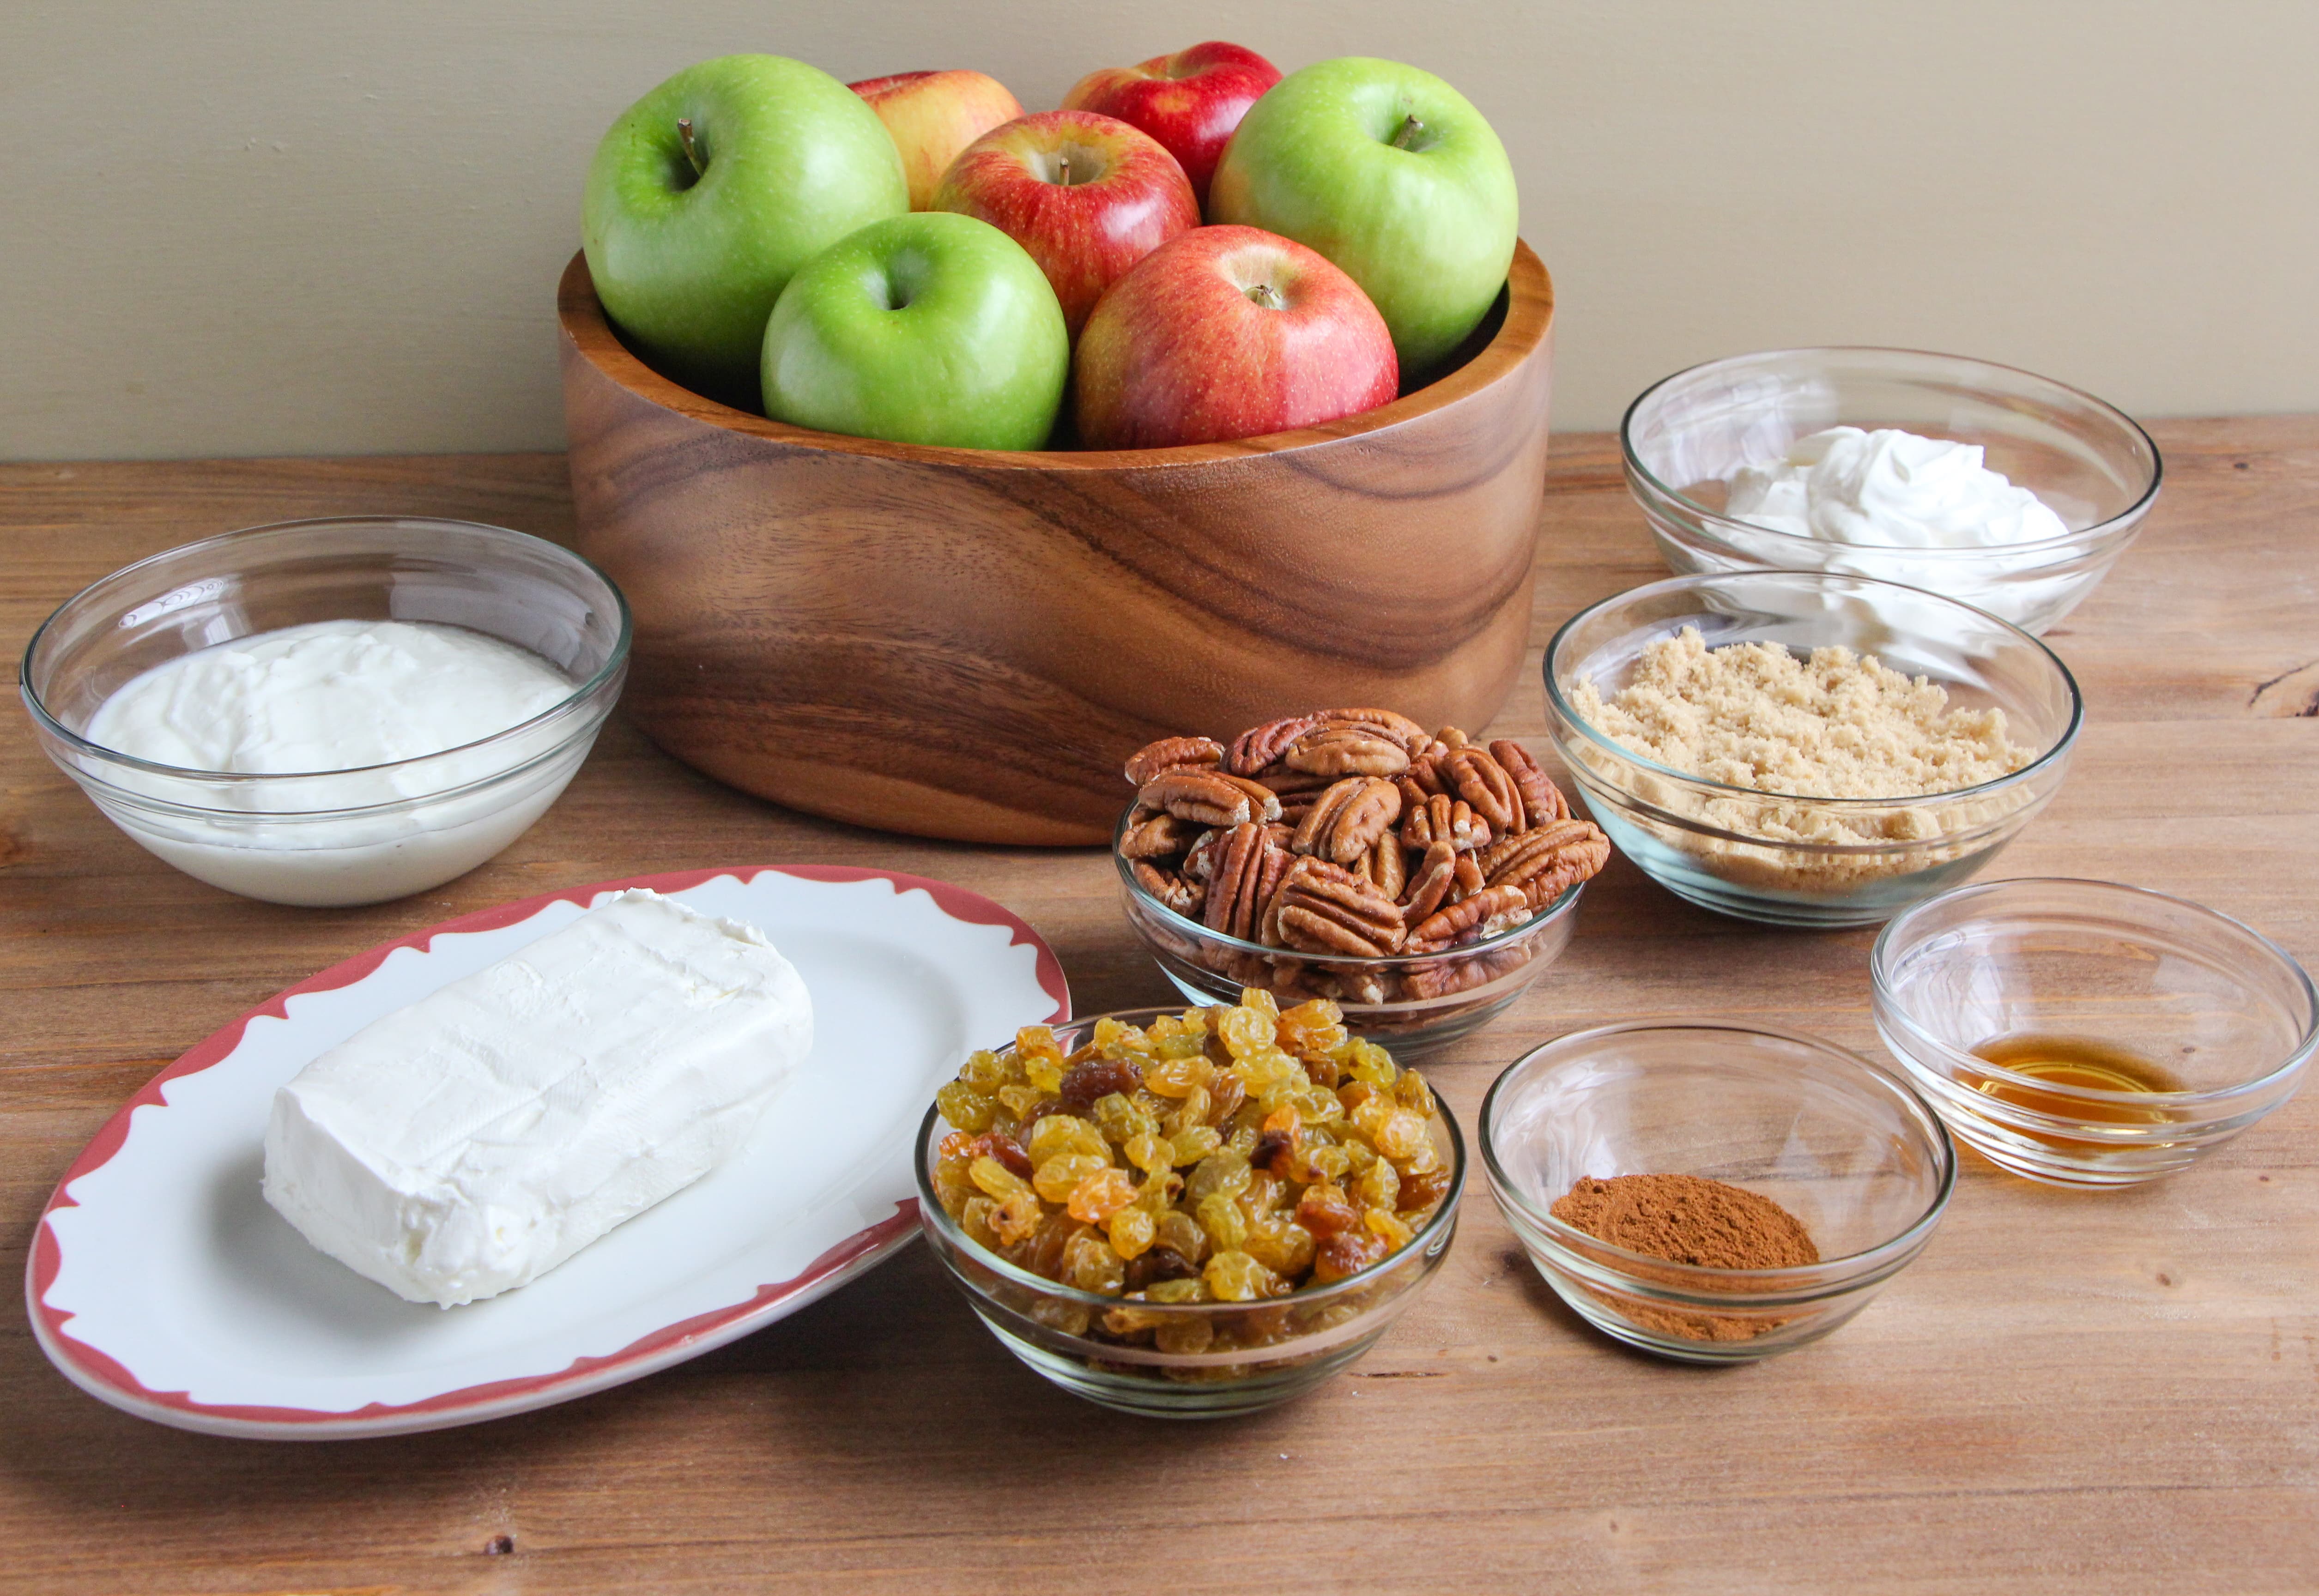 Ingredients needed to make Creamy Apple Salad presented on a wooden tabletop.